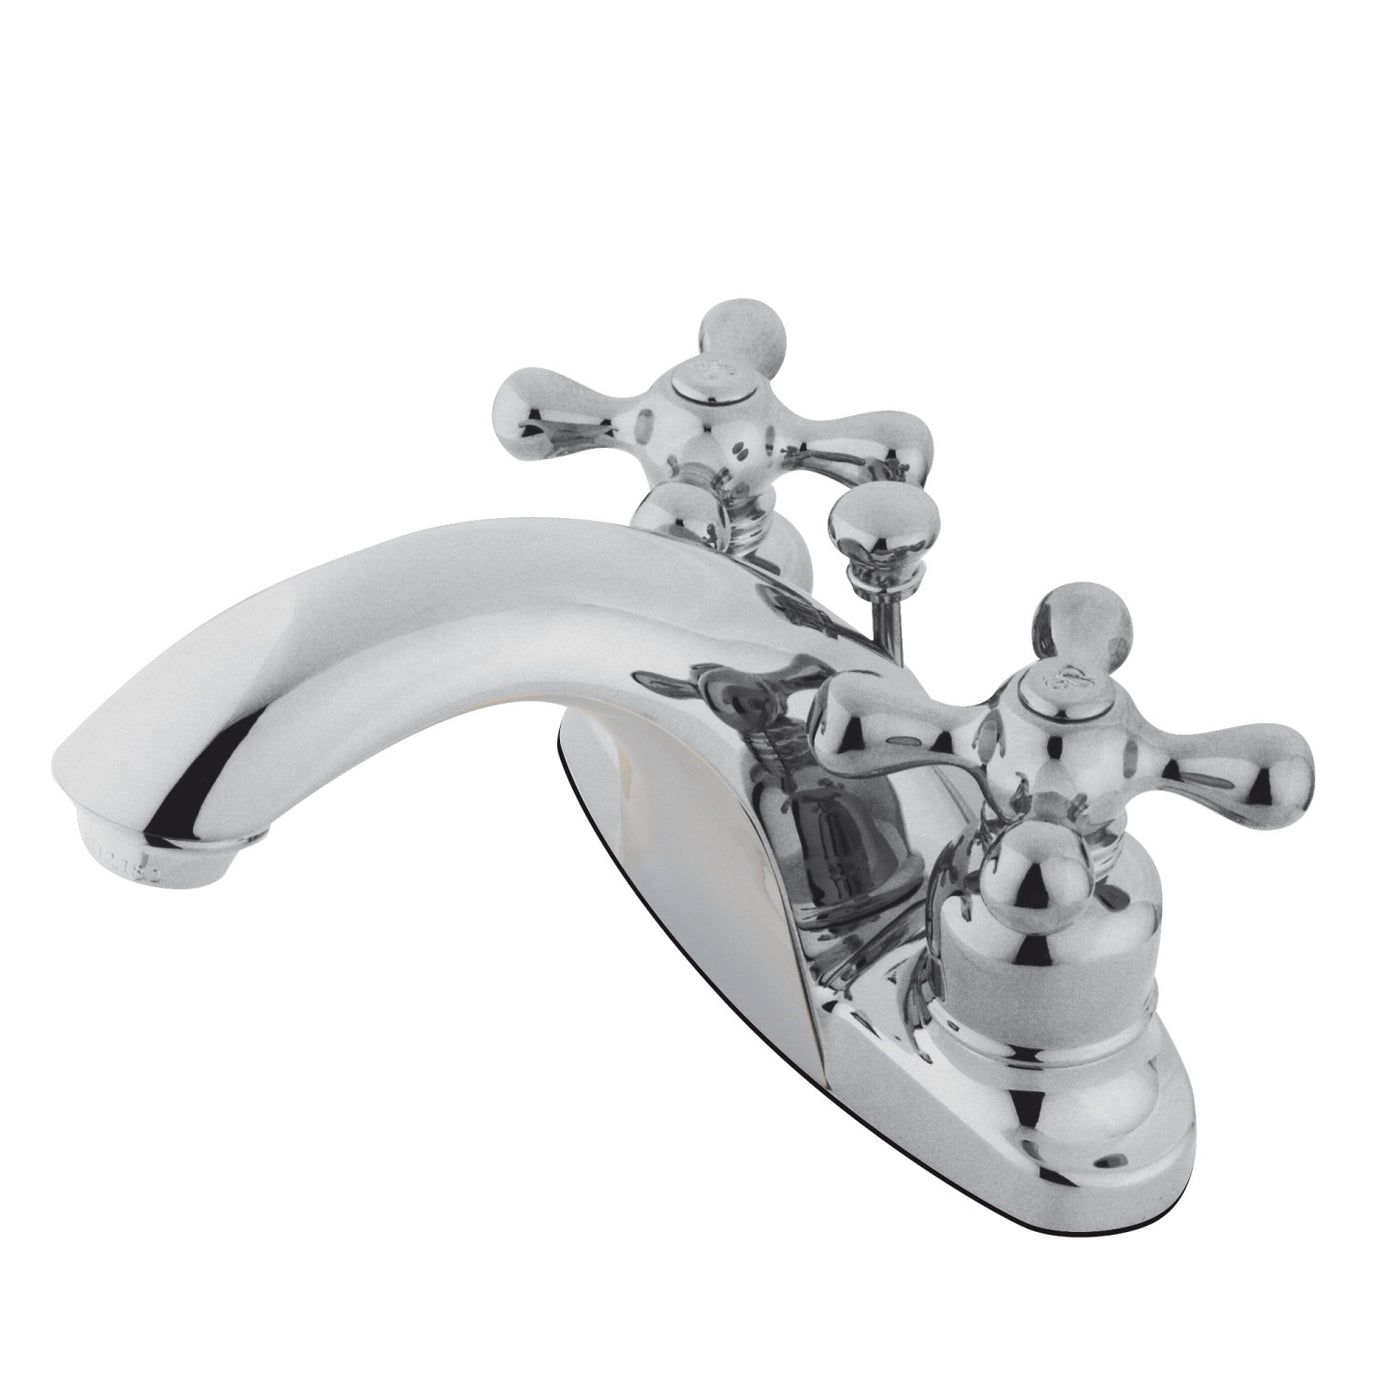 Elements of Design EB7641AX 4-Inch Centerset Bathroom Faucet, Polished Chrome